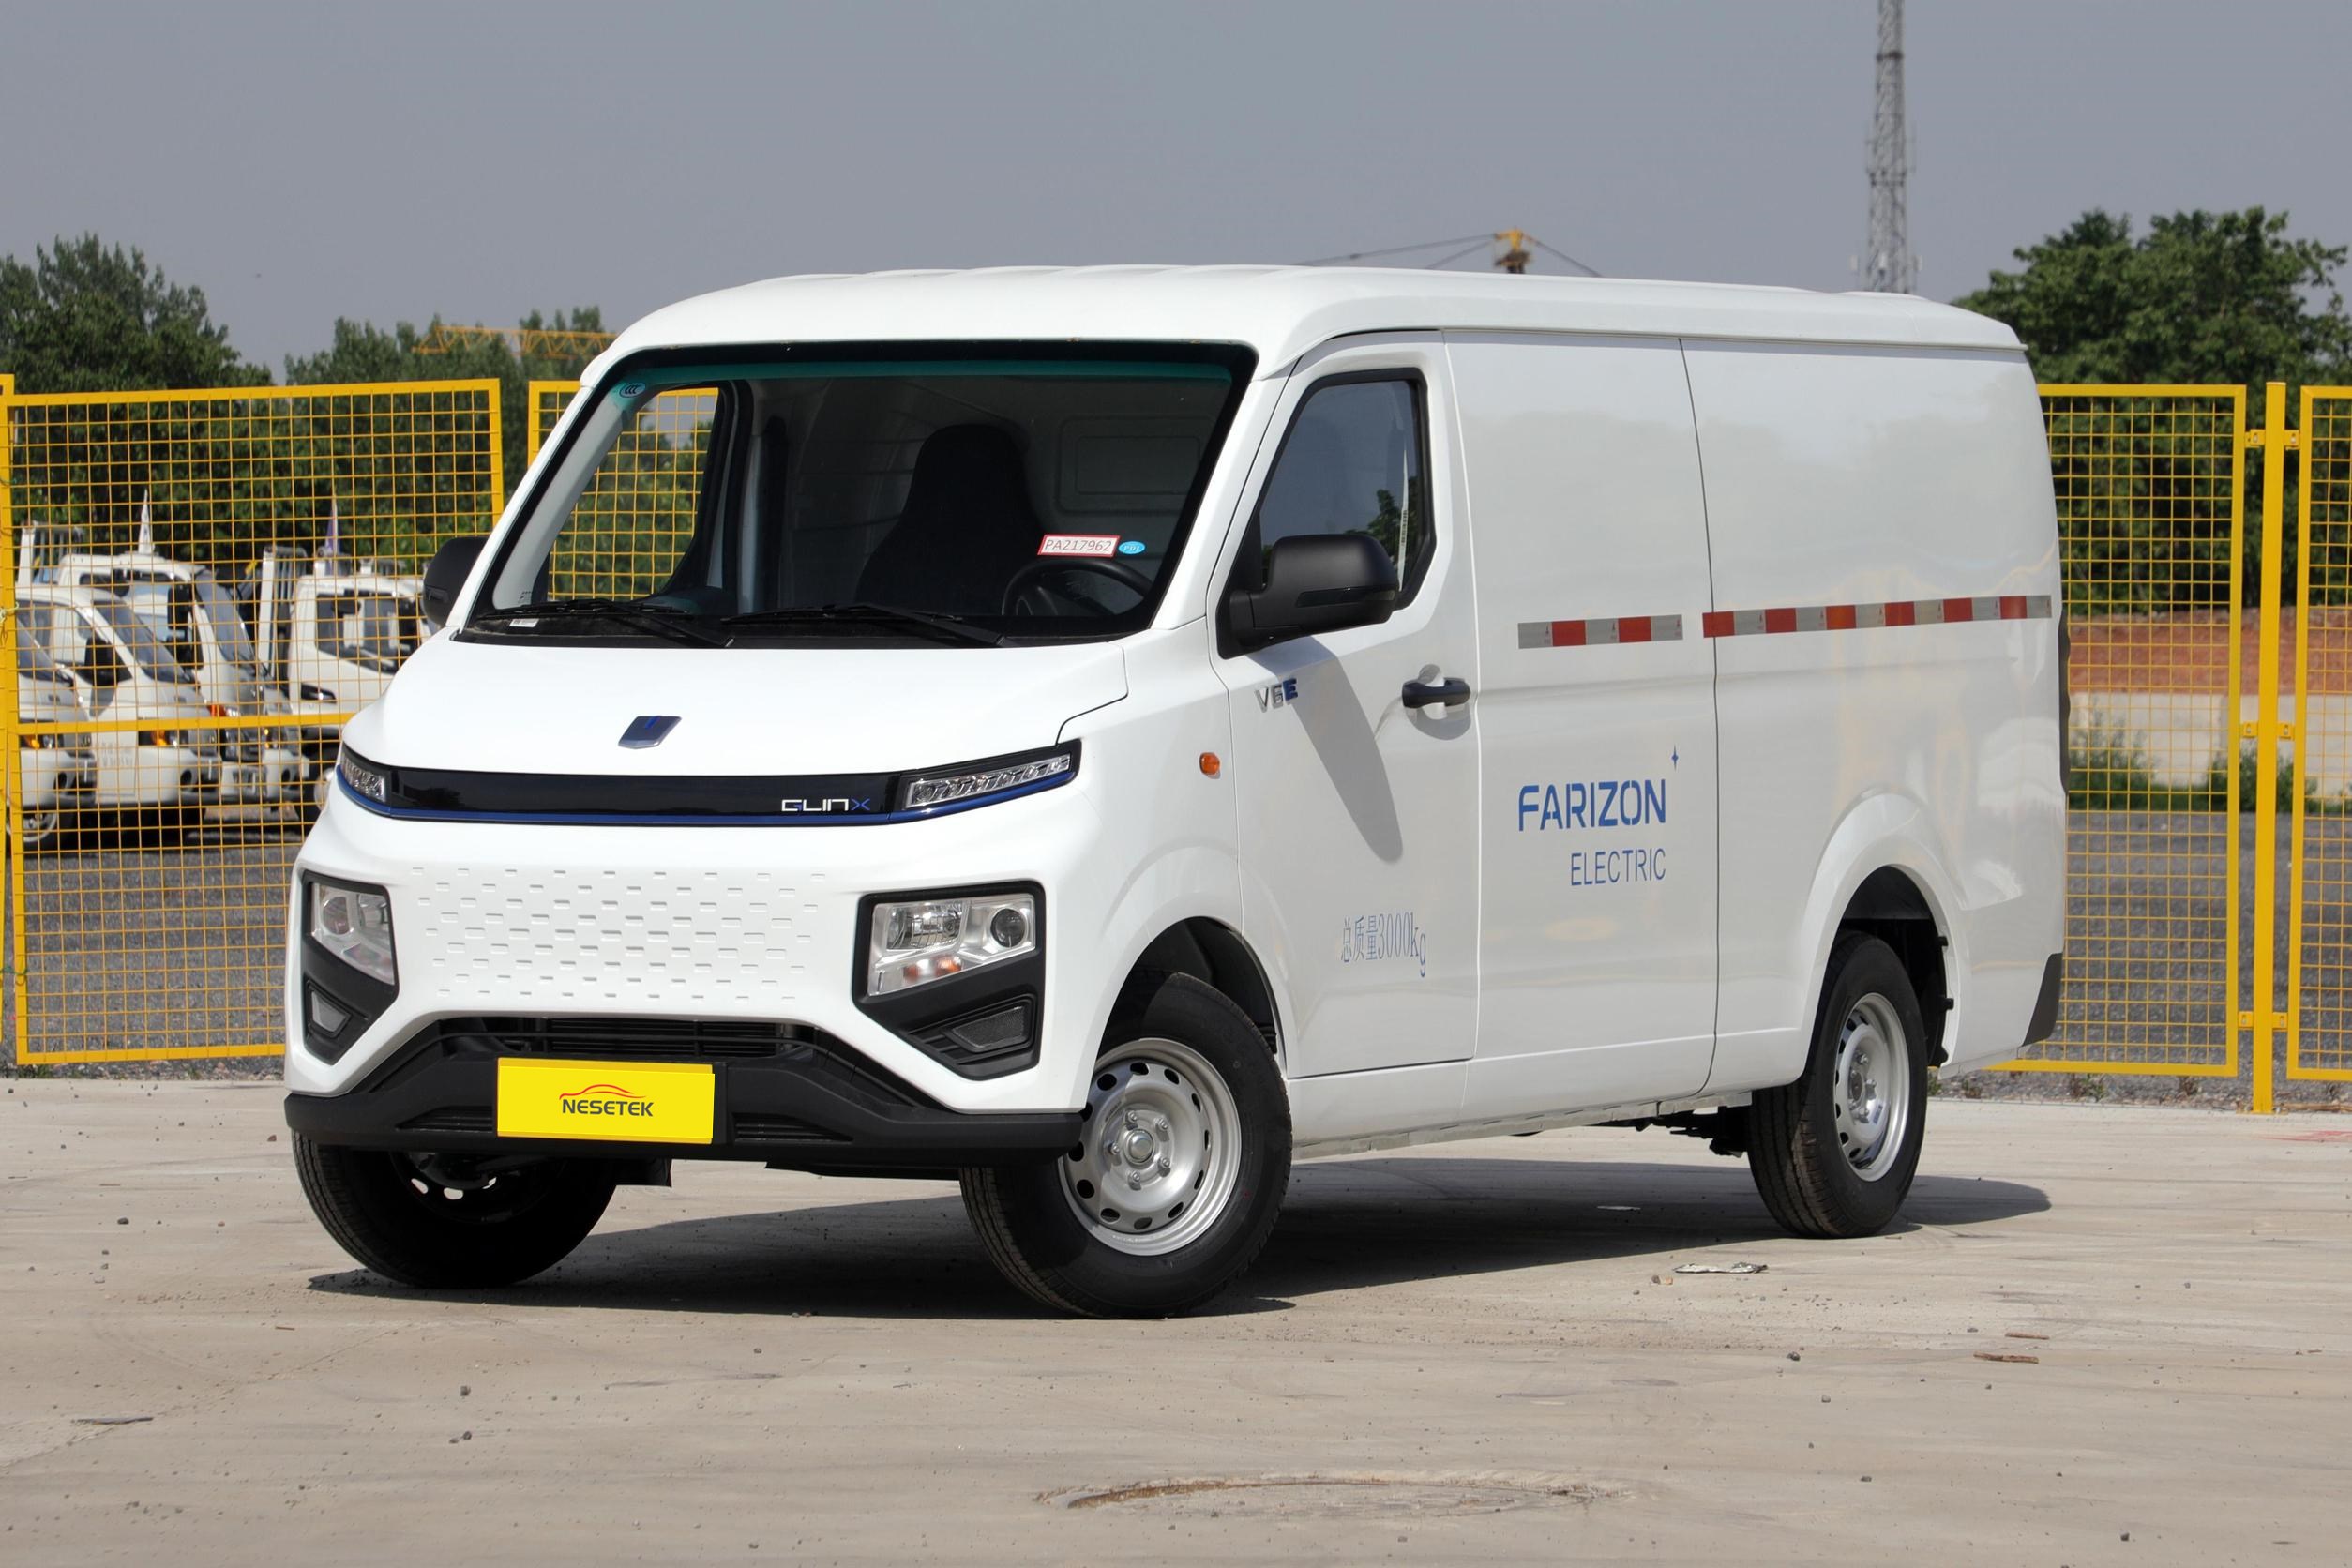 GEELY Farizon V6E Logistics Cargo Delivery Electric Van New Energy LCV Battery Vehicle